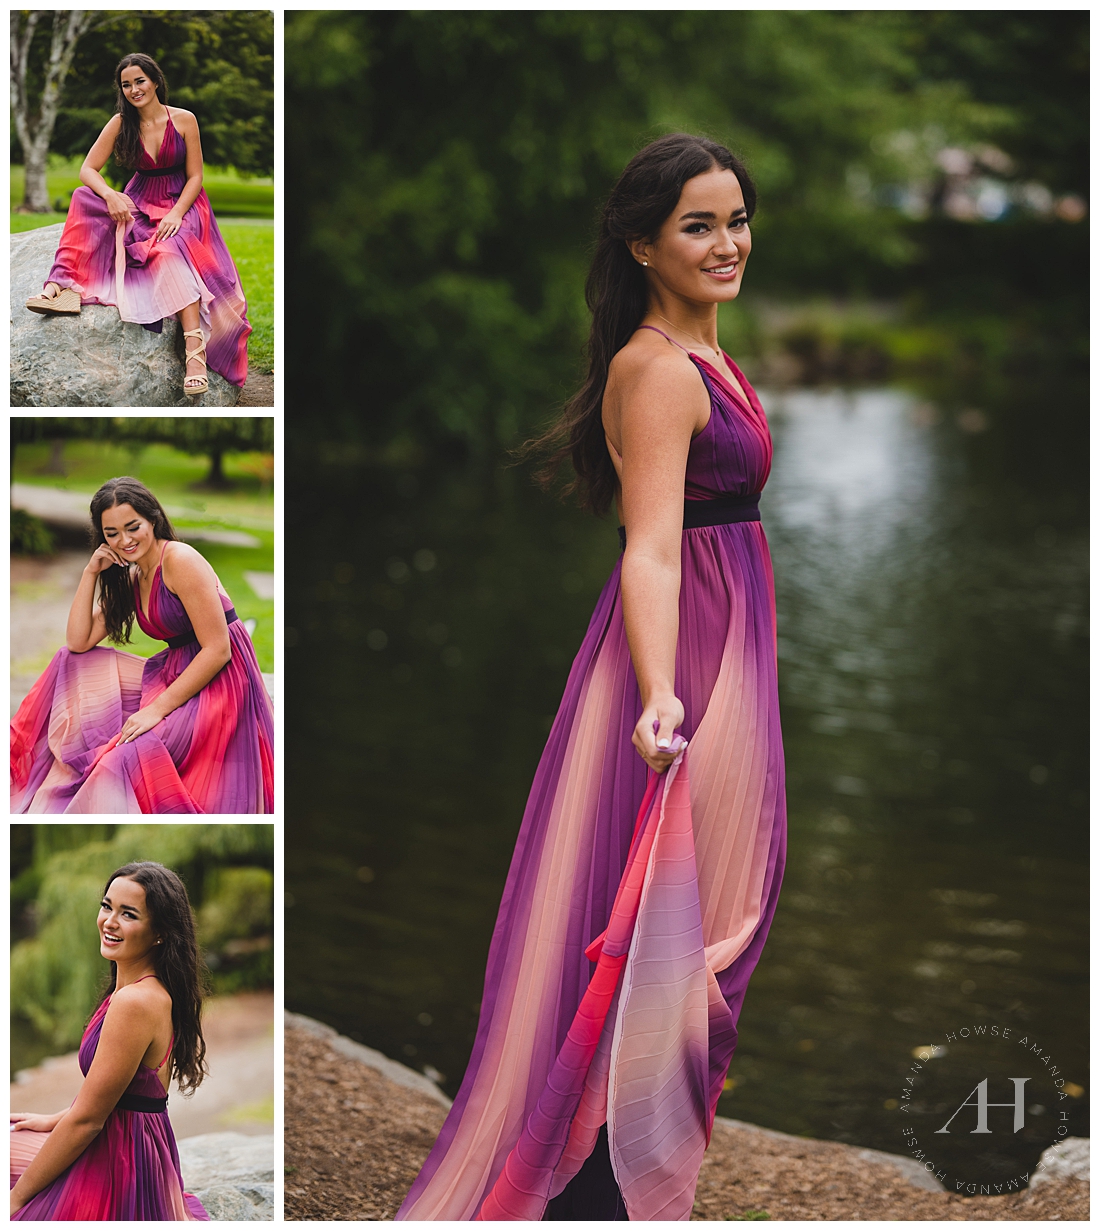 Colorful Summer Senior Portraits in Wrights Park | Photographed by the Best Tacoma, Washington Senior Photographer Amanda Howse Photography